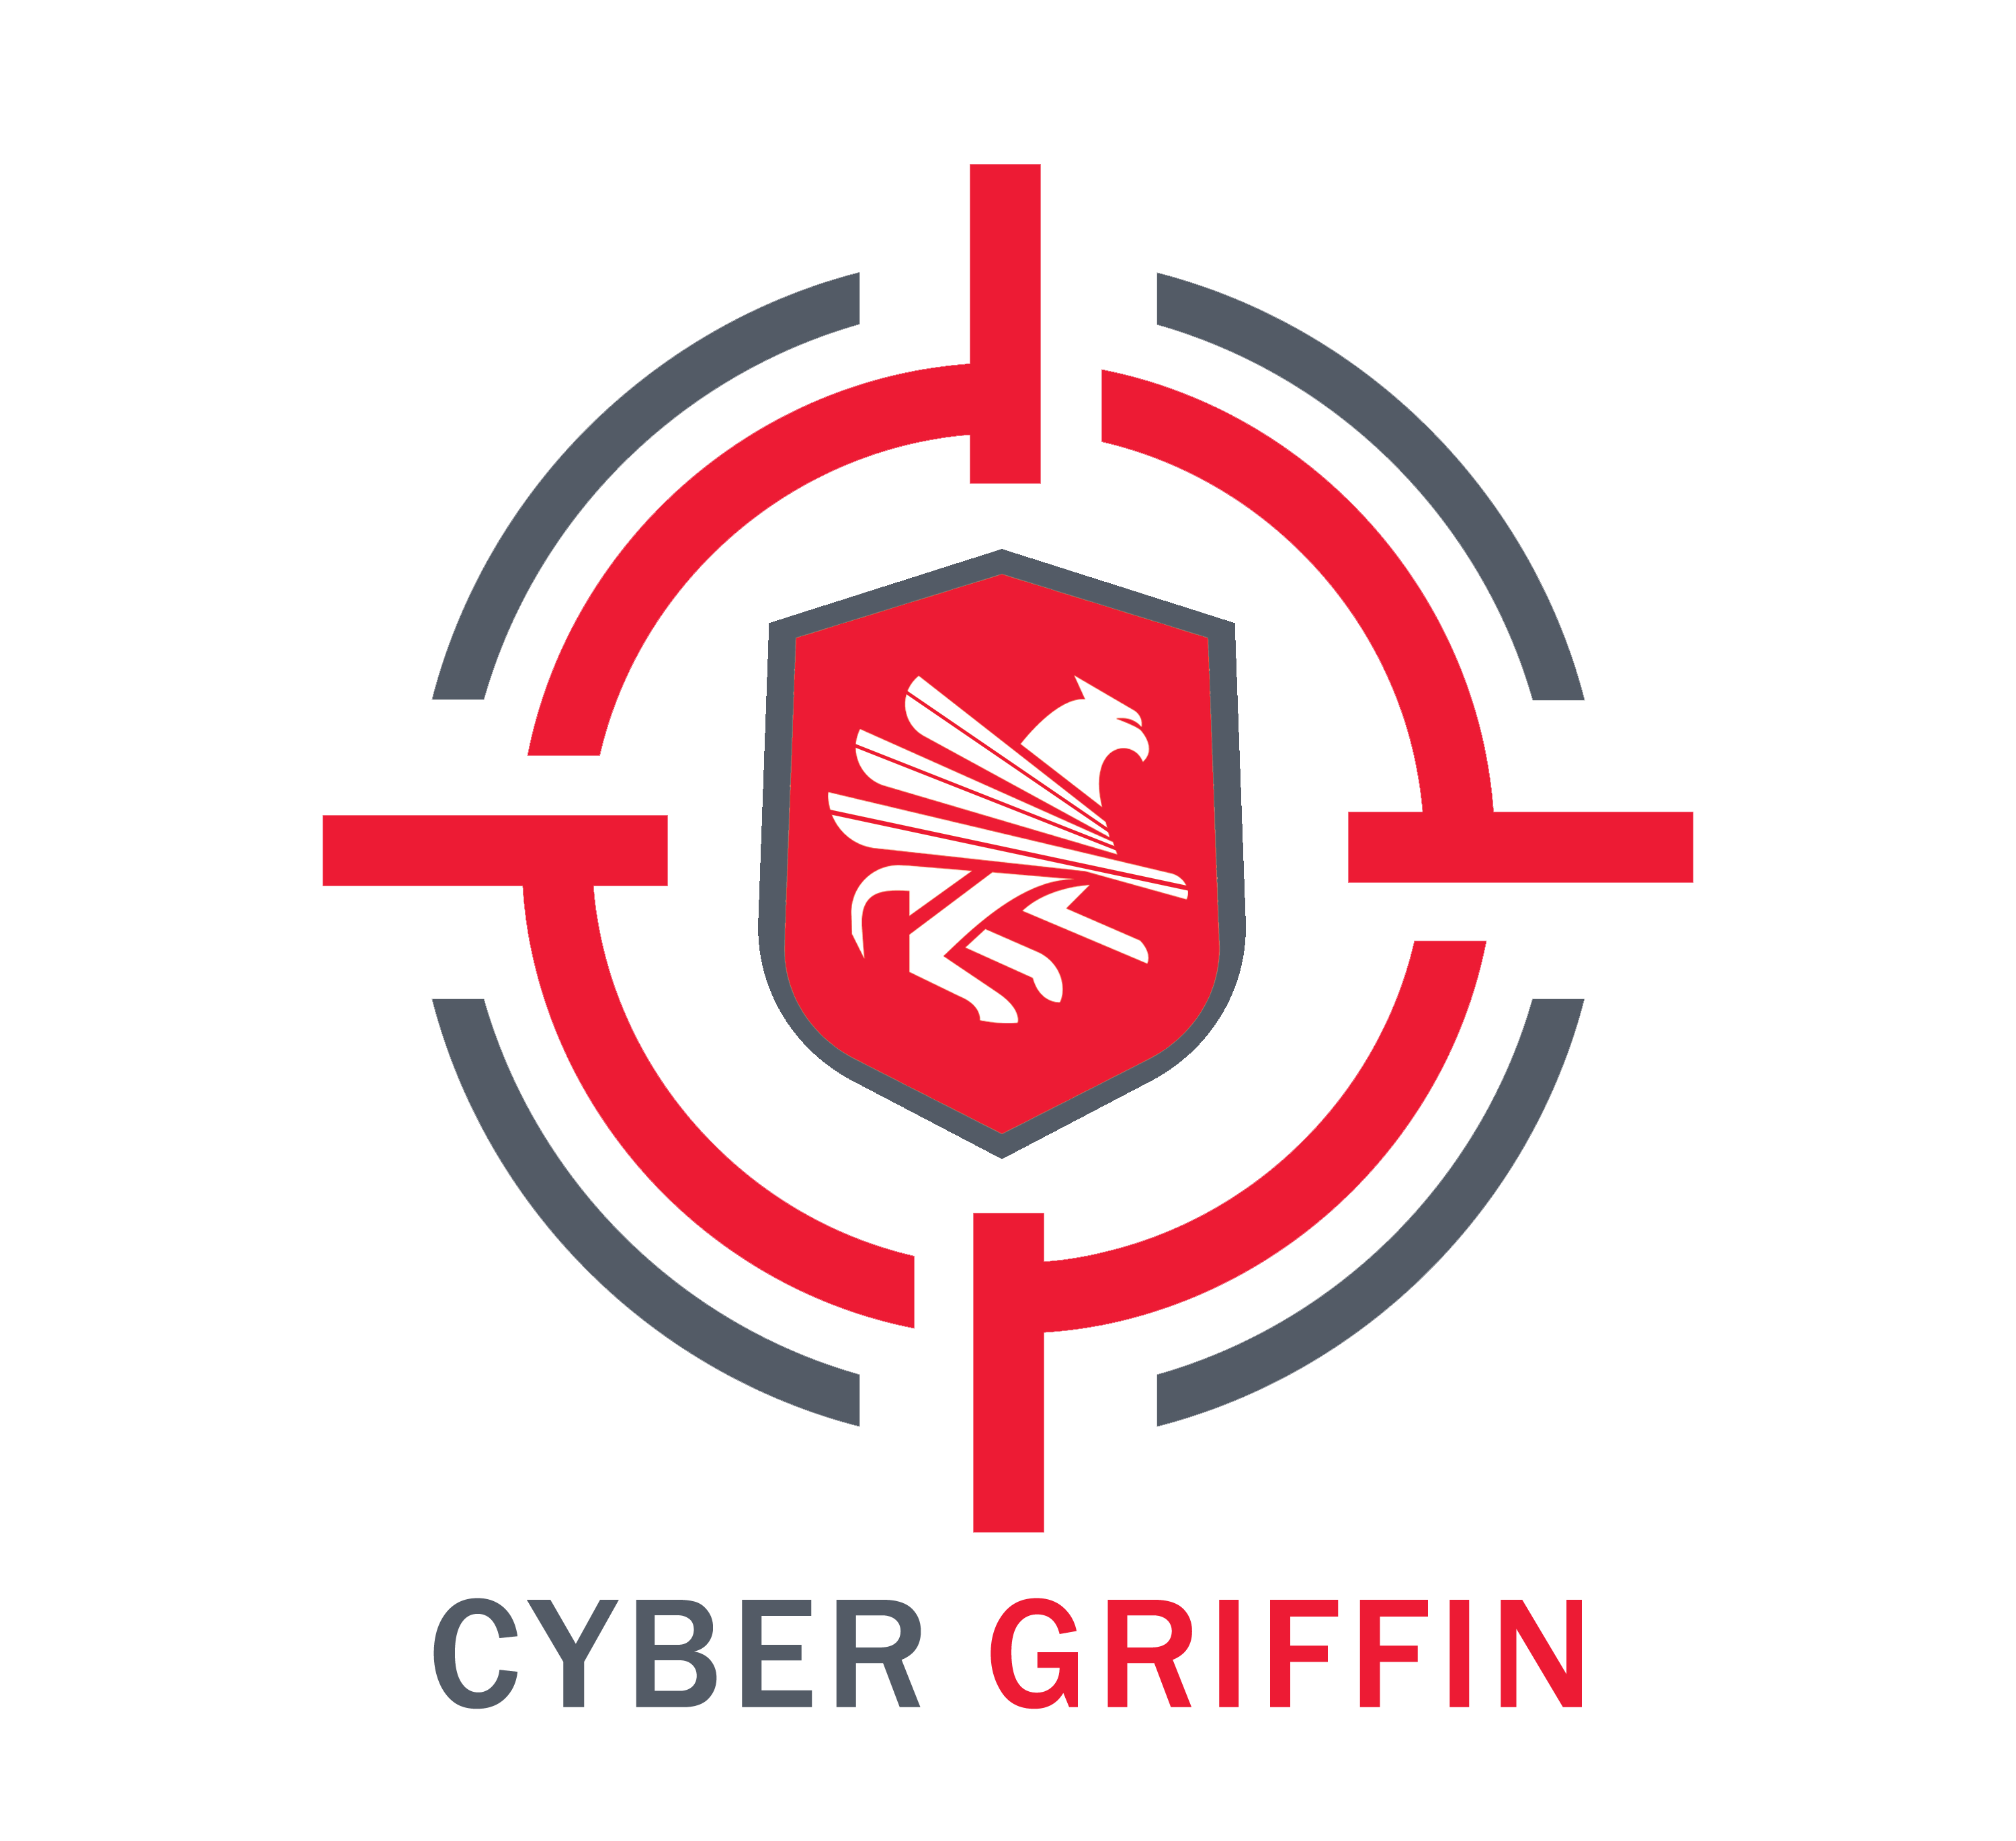 Cyber Griffin - City of London Police